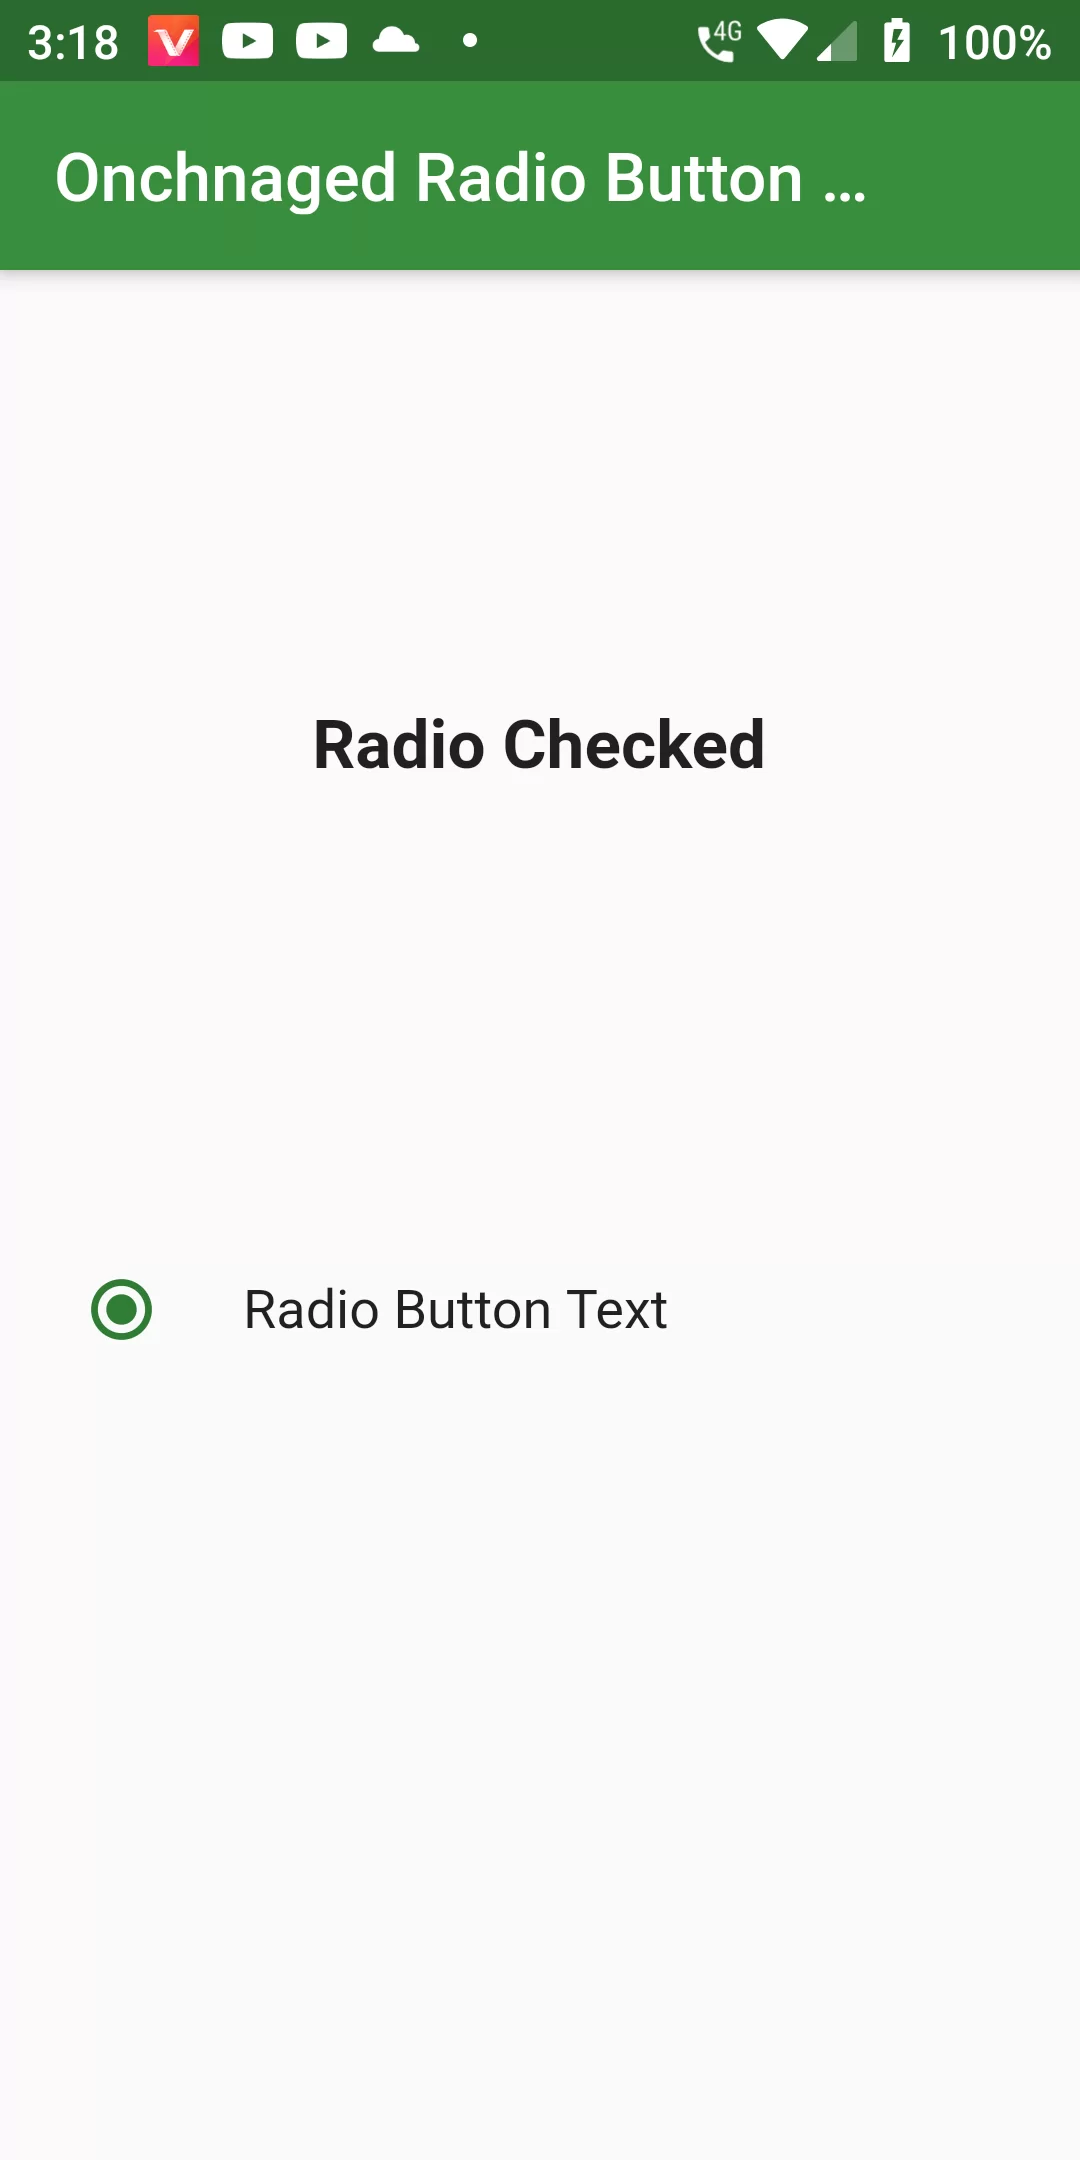 How To Add Onchnaged Radio Button Listener Using Flutter App